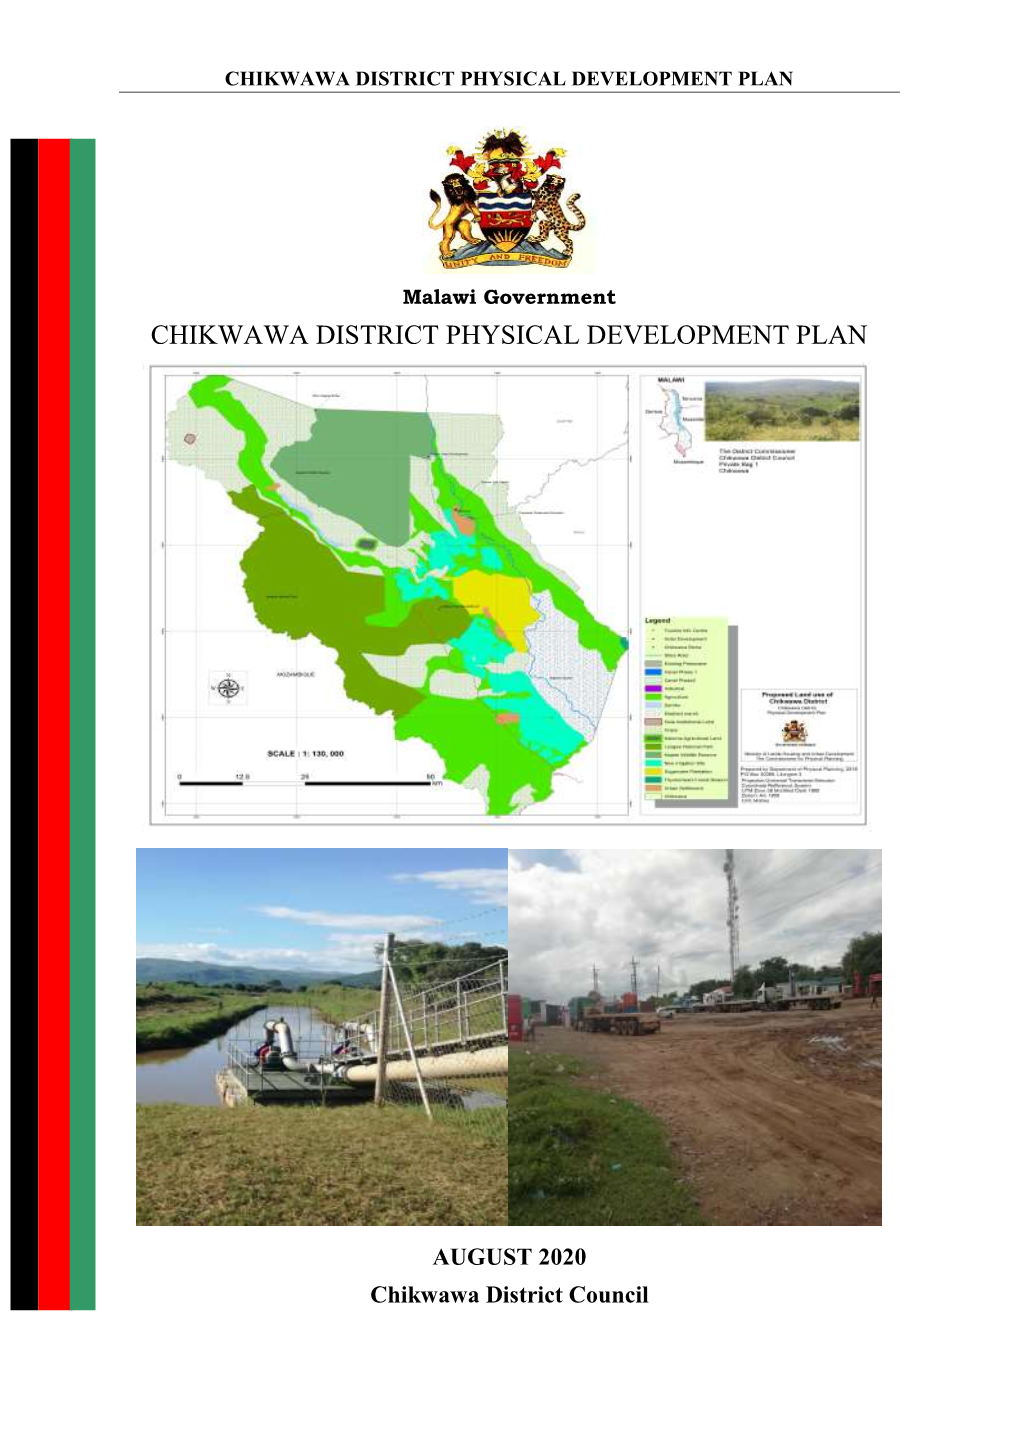 Chikwawa District Physical Development Plan Approved